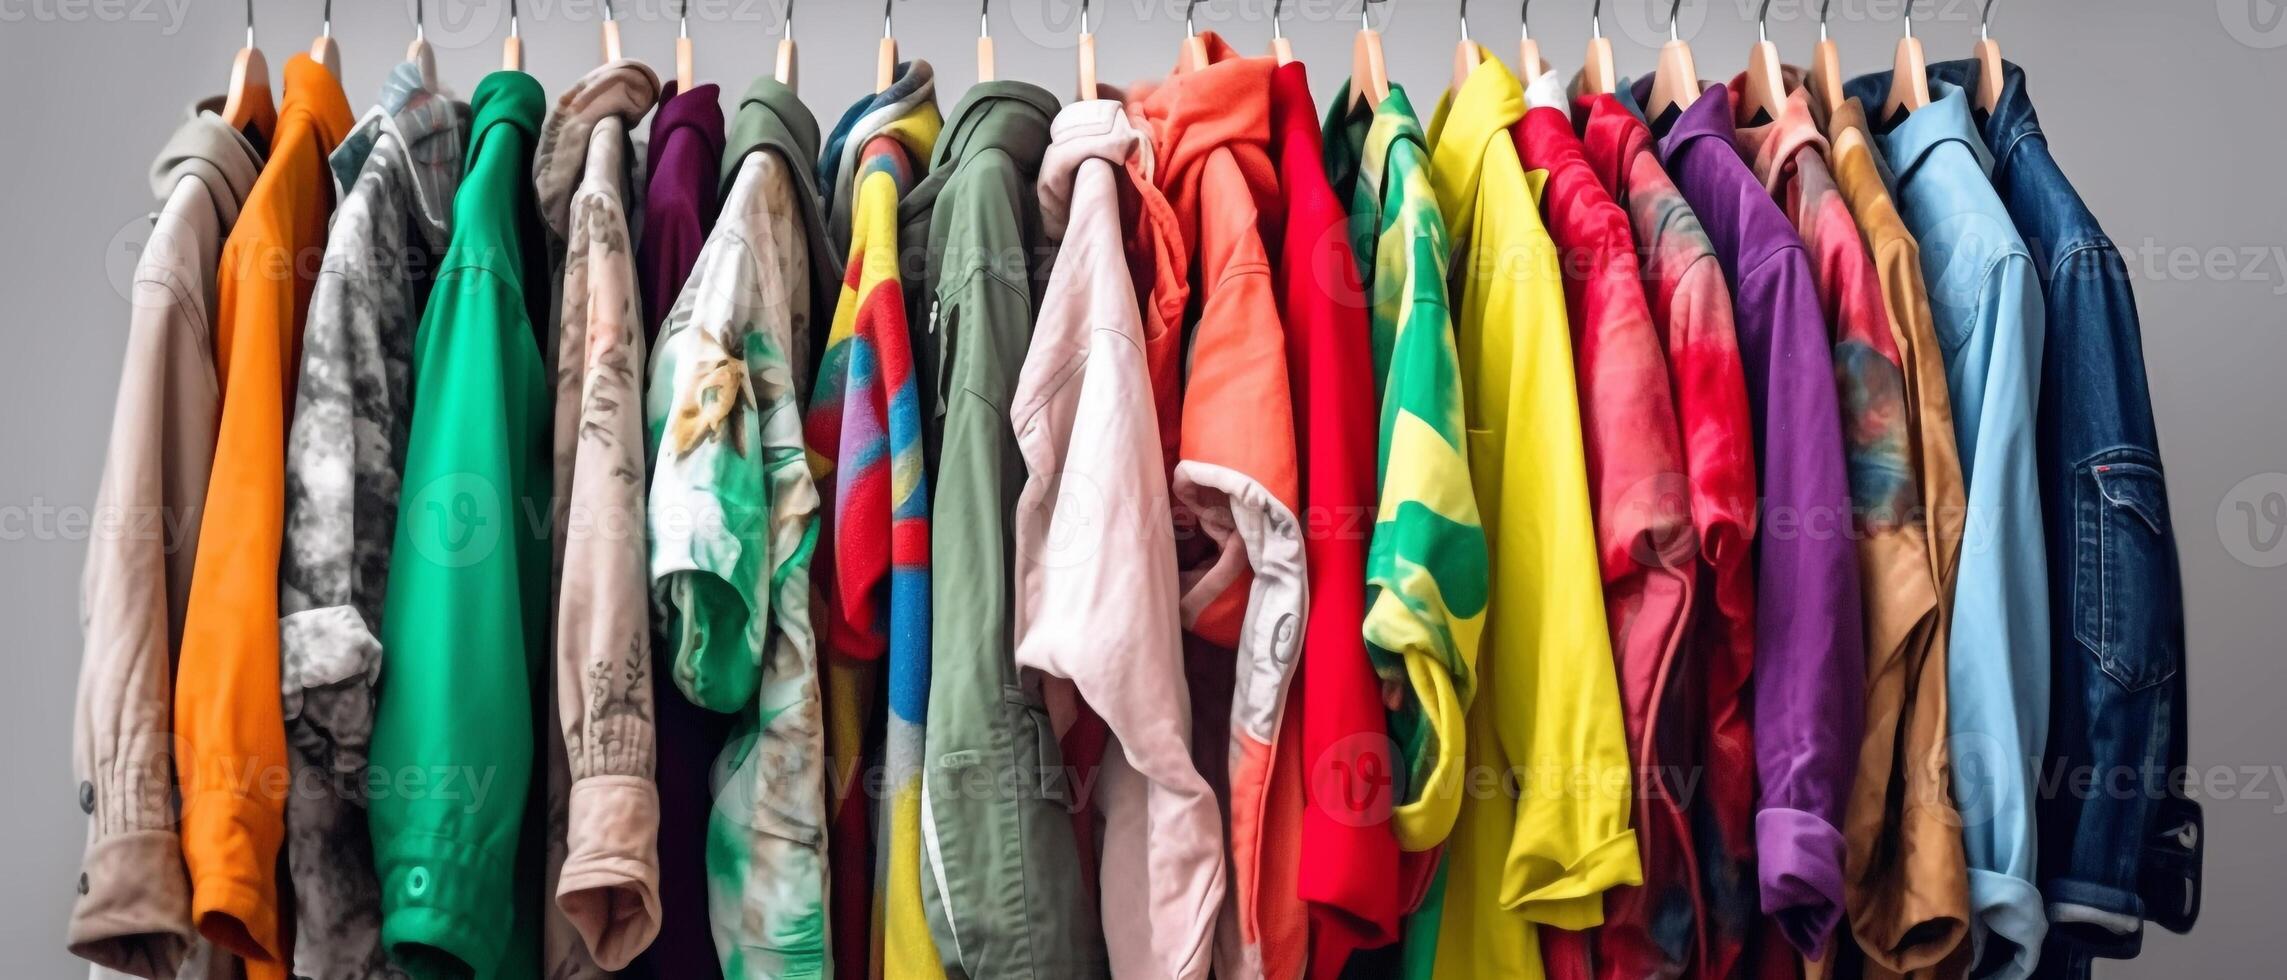 Colorful Collection of Women S Clothes Stock Image - Image of